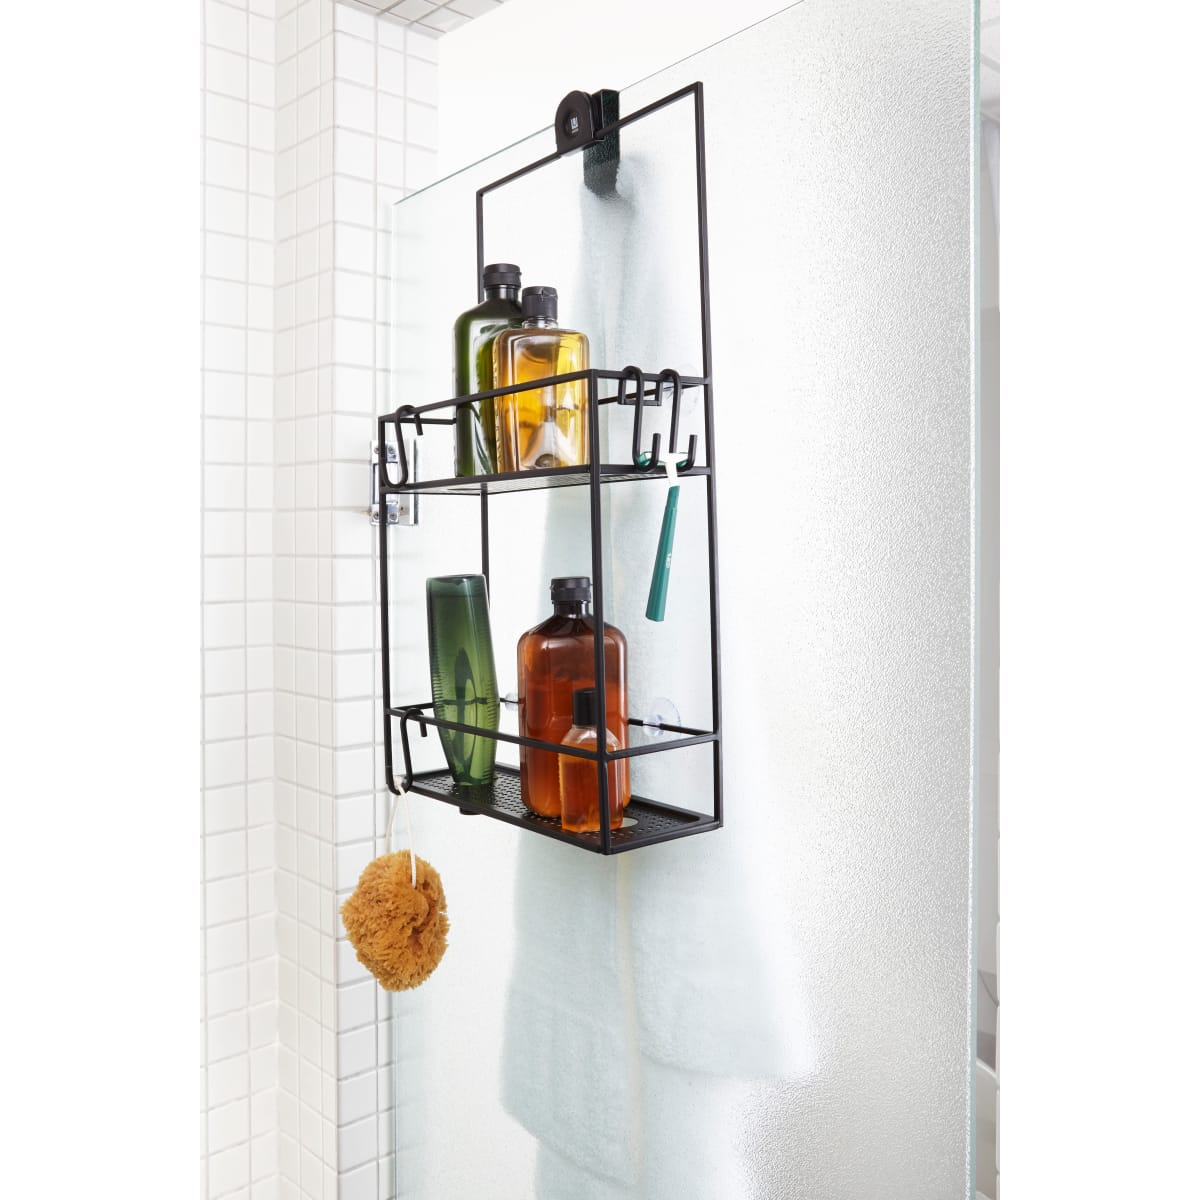 Umbra Cubiko Stainless Steel Shower Caddy & Reviews